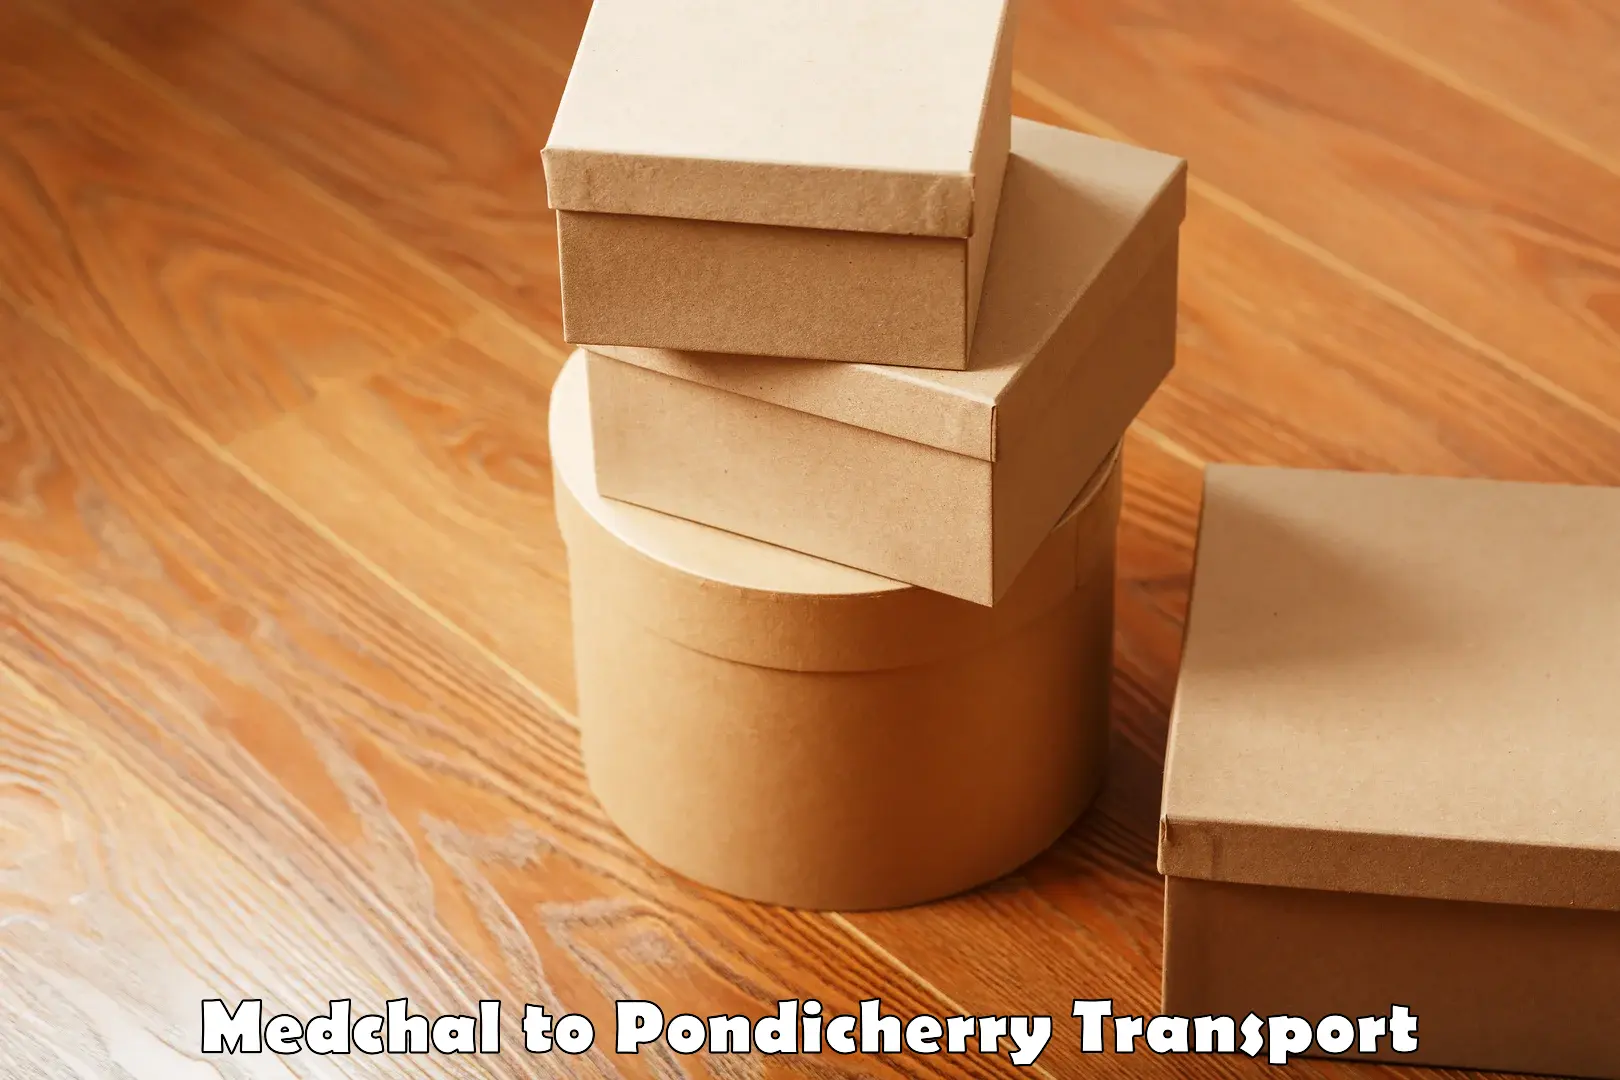 Container transport service Medchal to Pondicherry